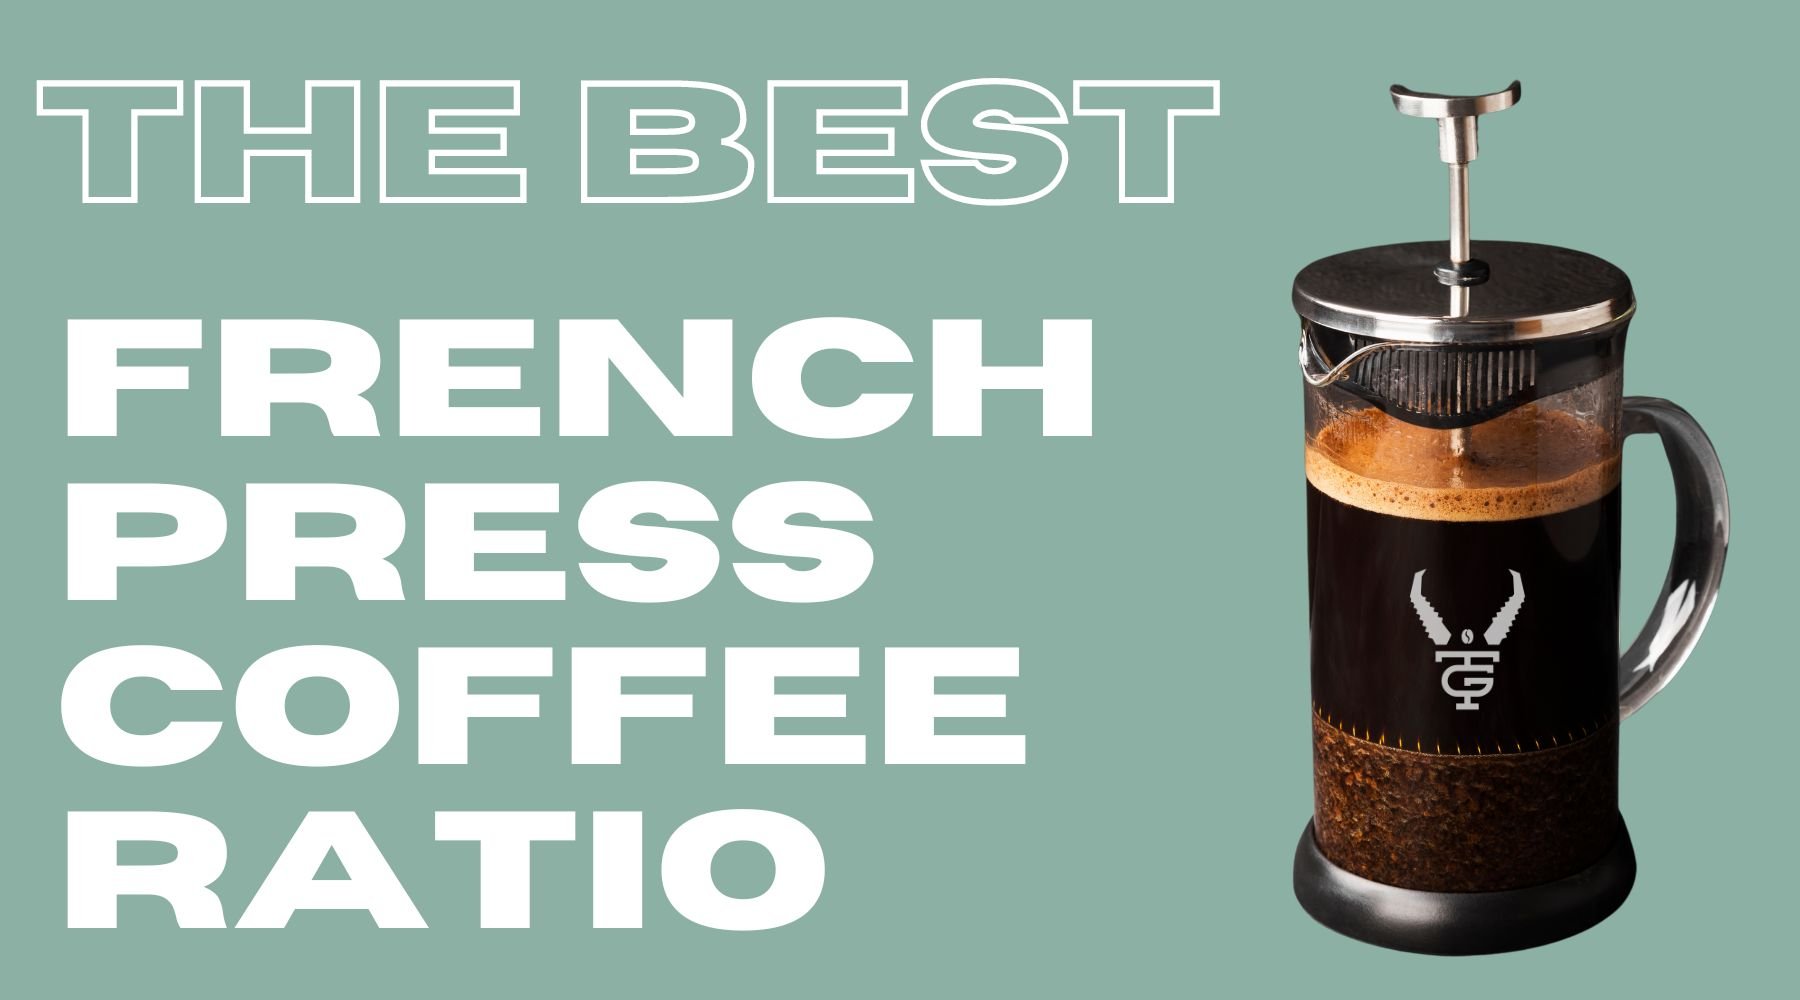 http://twistedgoatcoffee.com/cdn/shop/articles/what-is-the-best-french-press-coffee-ratio-249833.jpg?v=1684768215